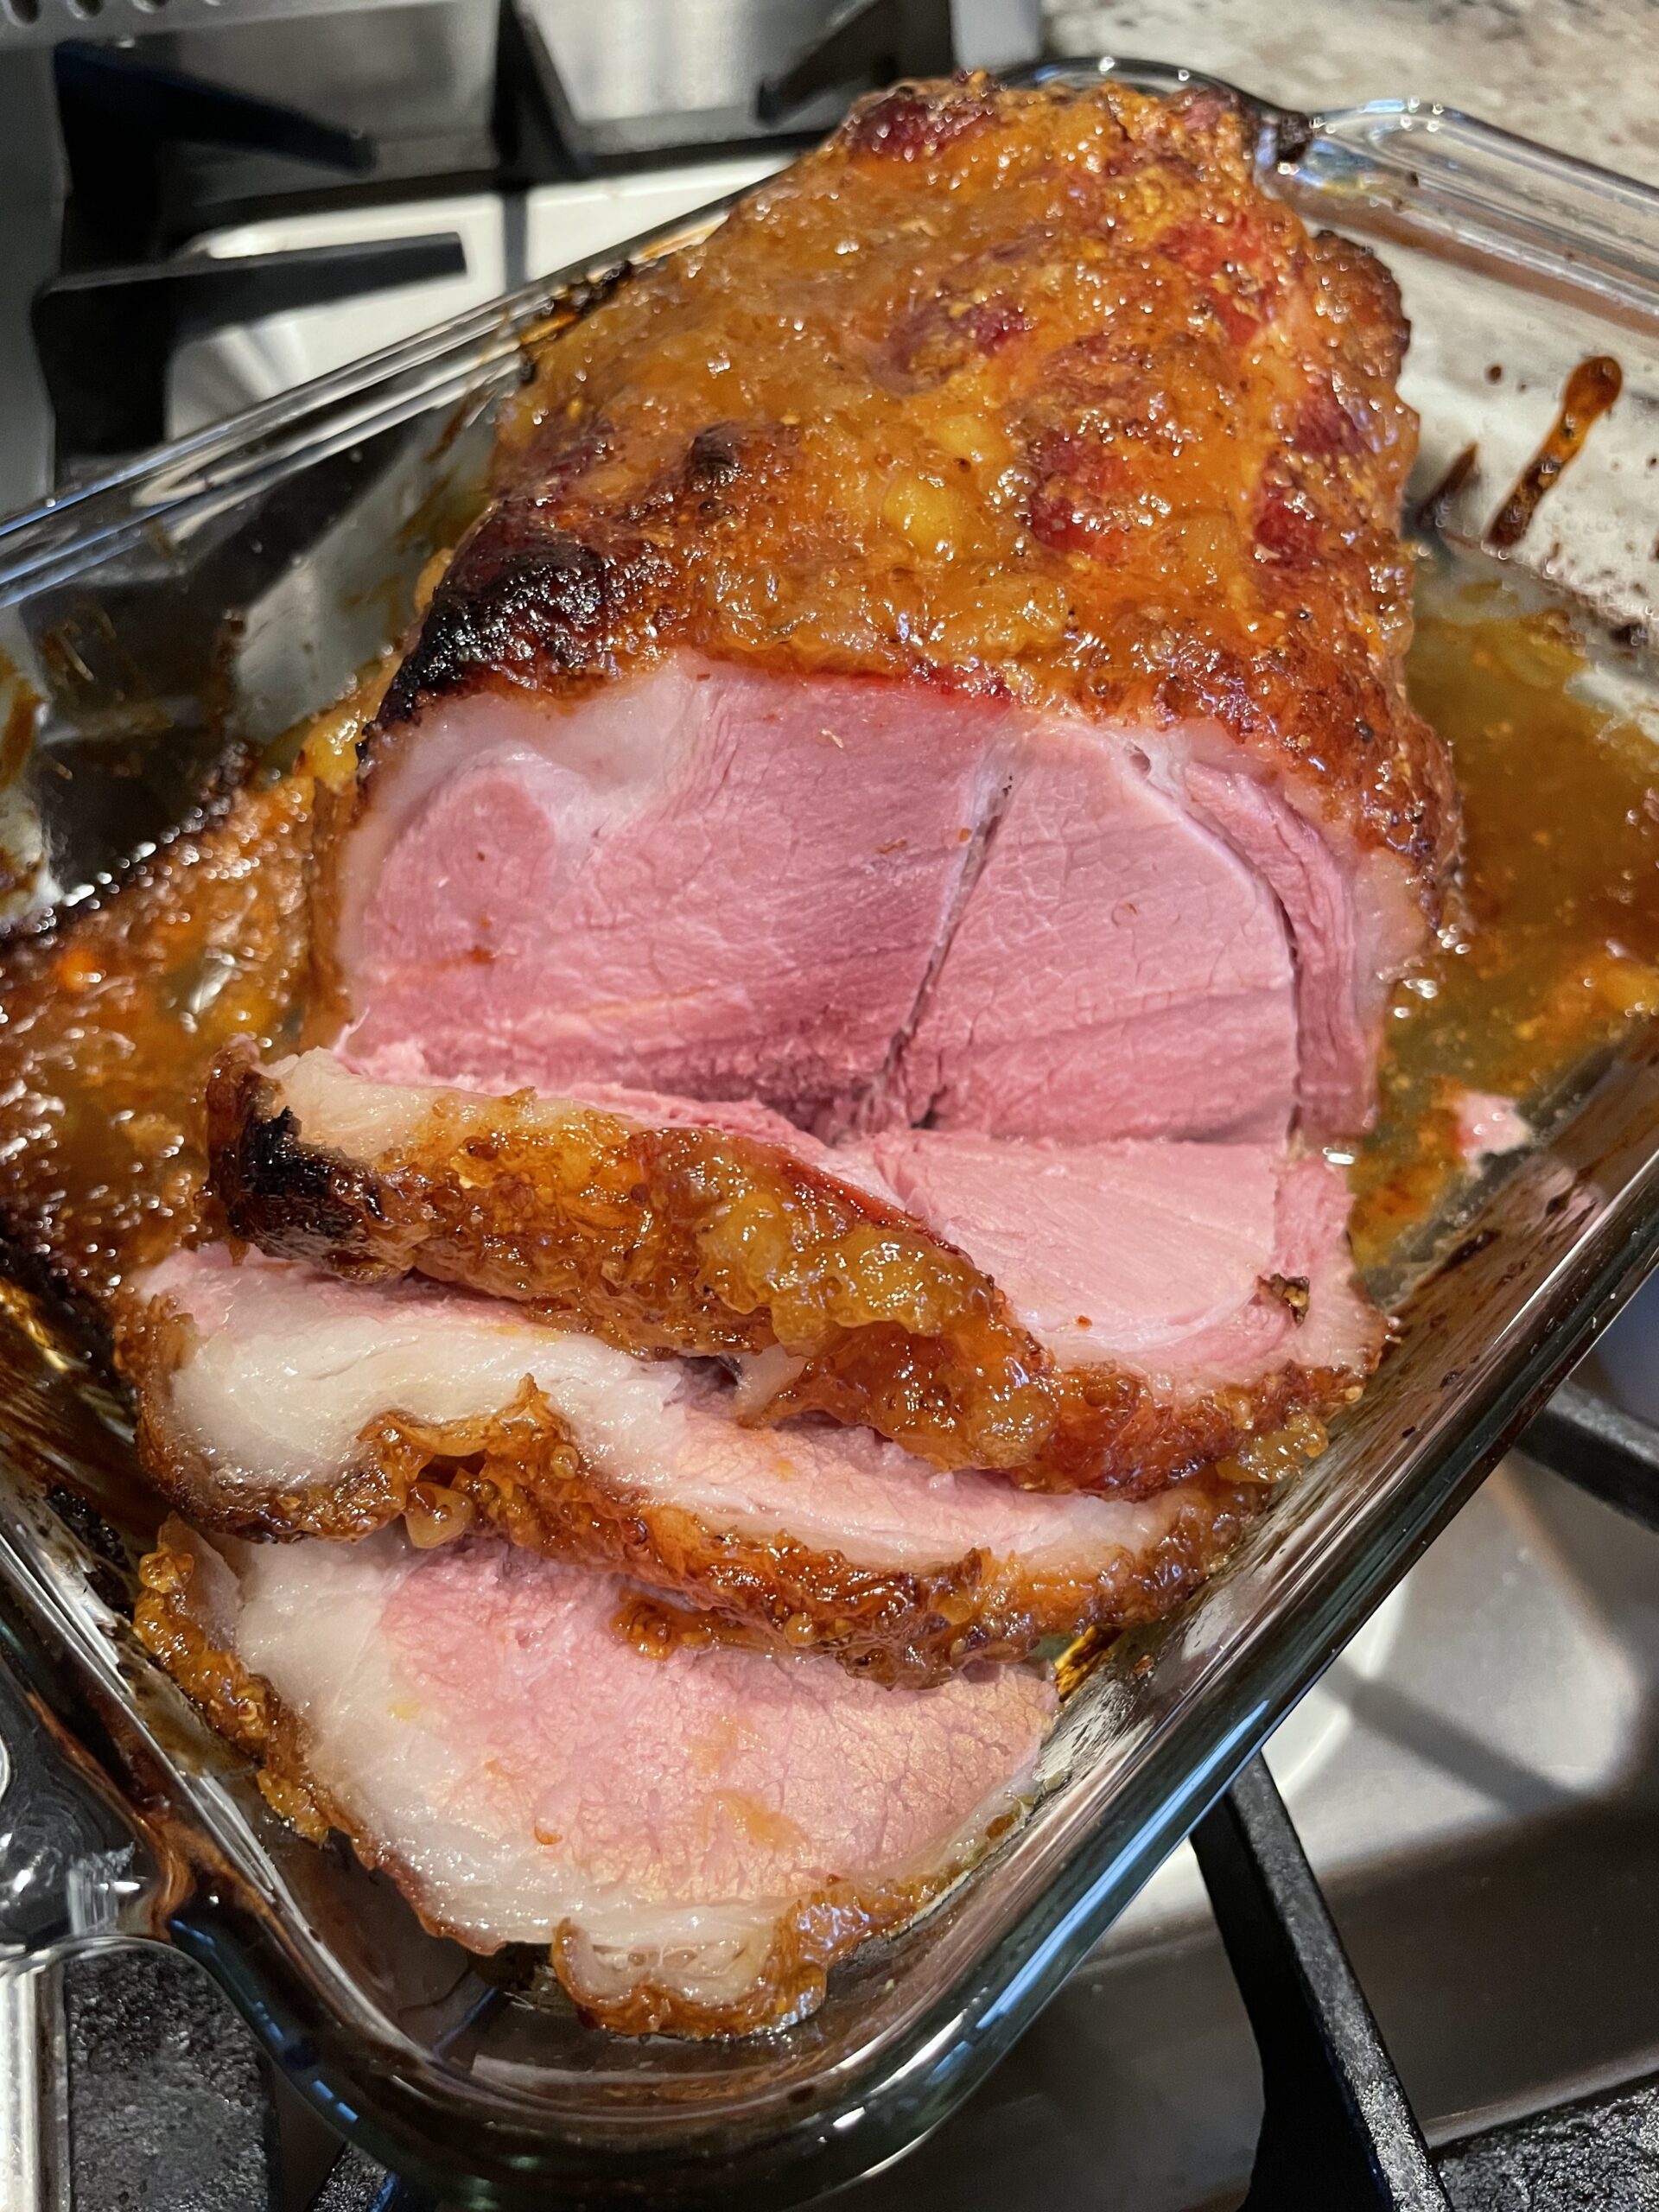 A roasted ham is sliced and ready for eating.